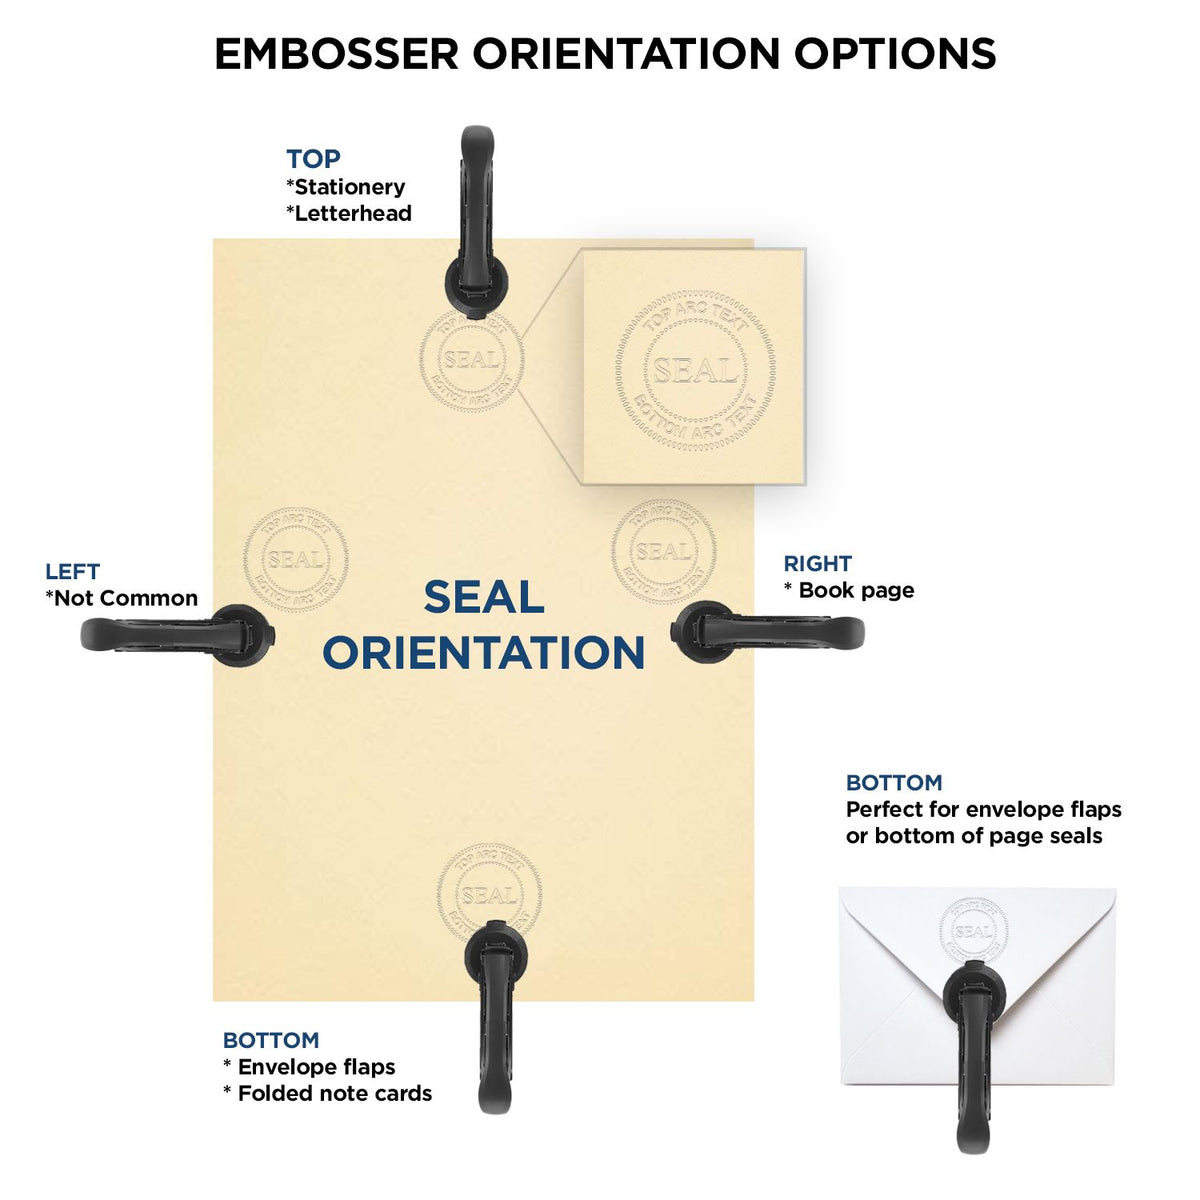 An infographic for the Heavy Duty Cast Iron Colorado Geologist Seal Embosser showing embosser orientation, this is showing examples of a top, bottom, right and left insert.